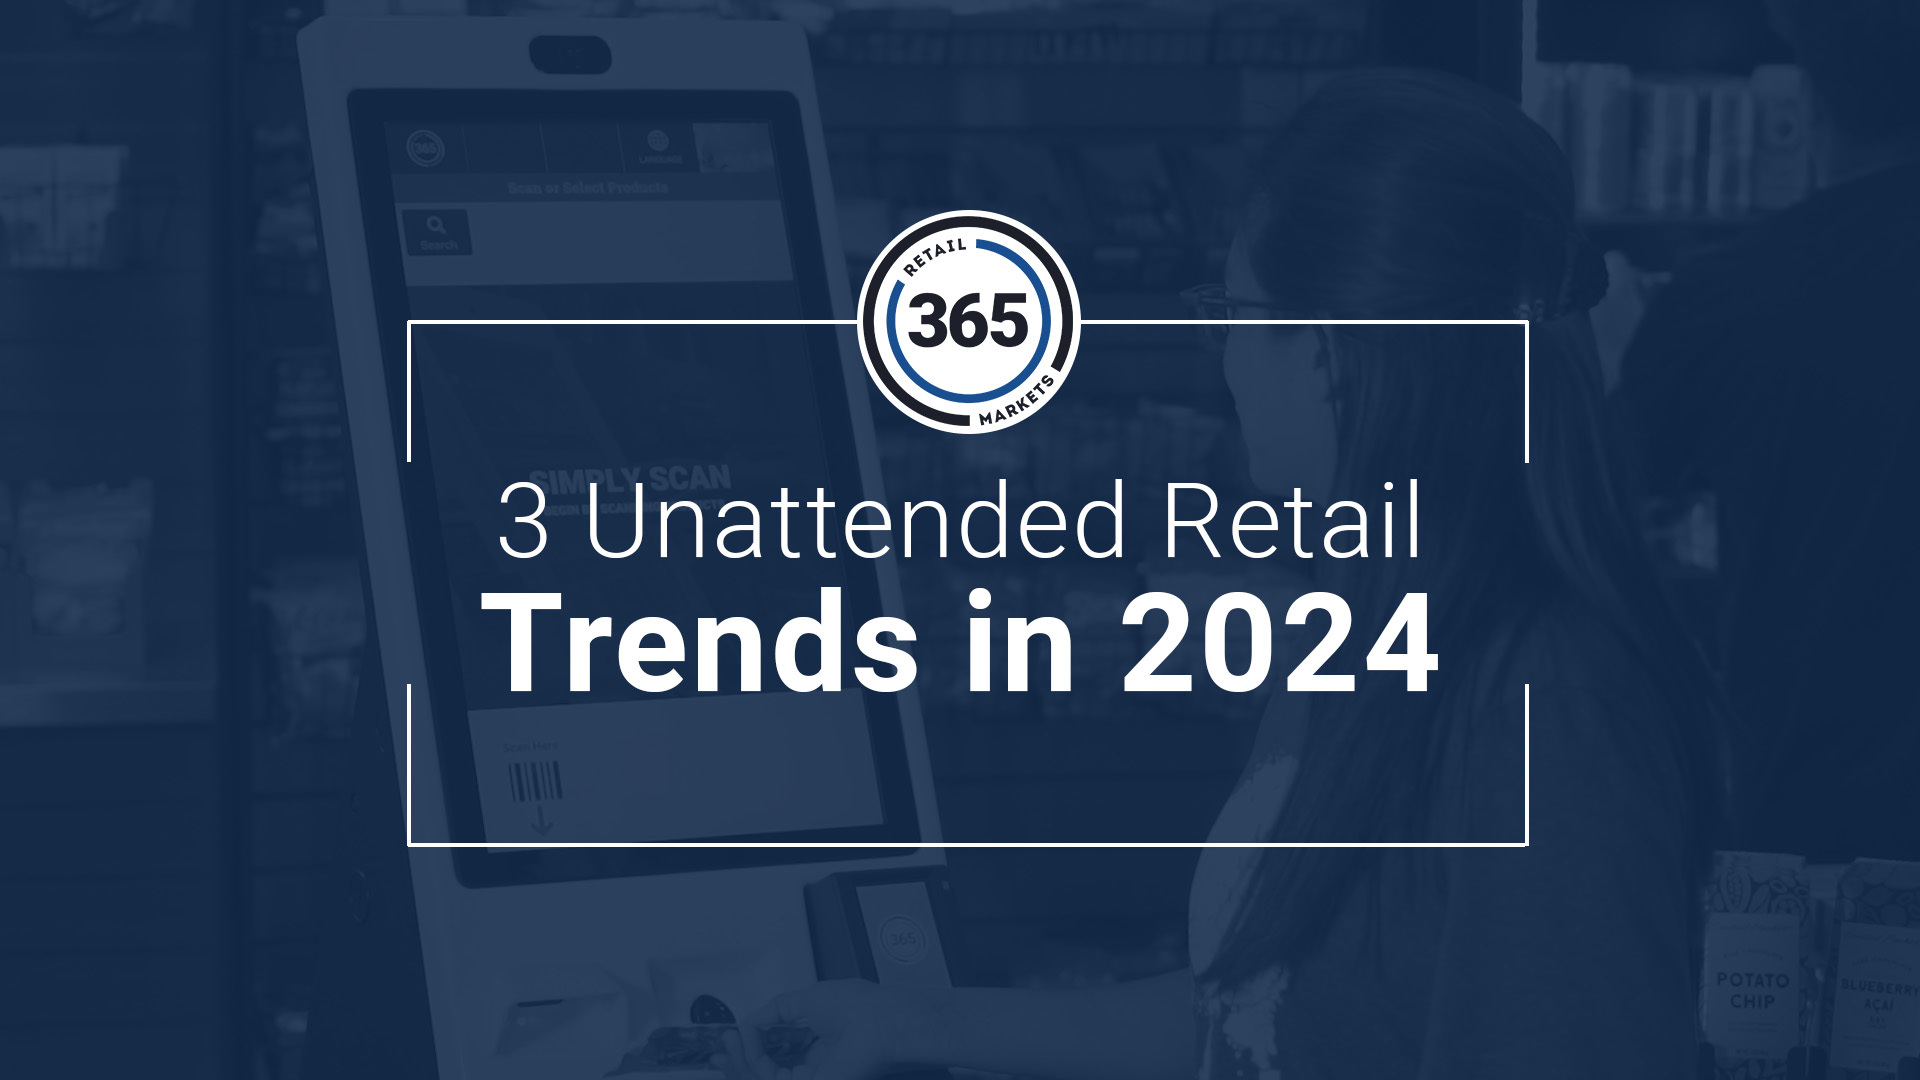 3 Unattended Retail Trends in 2024